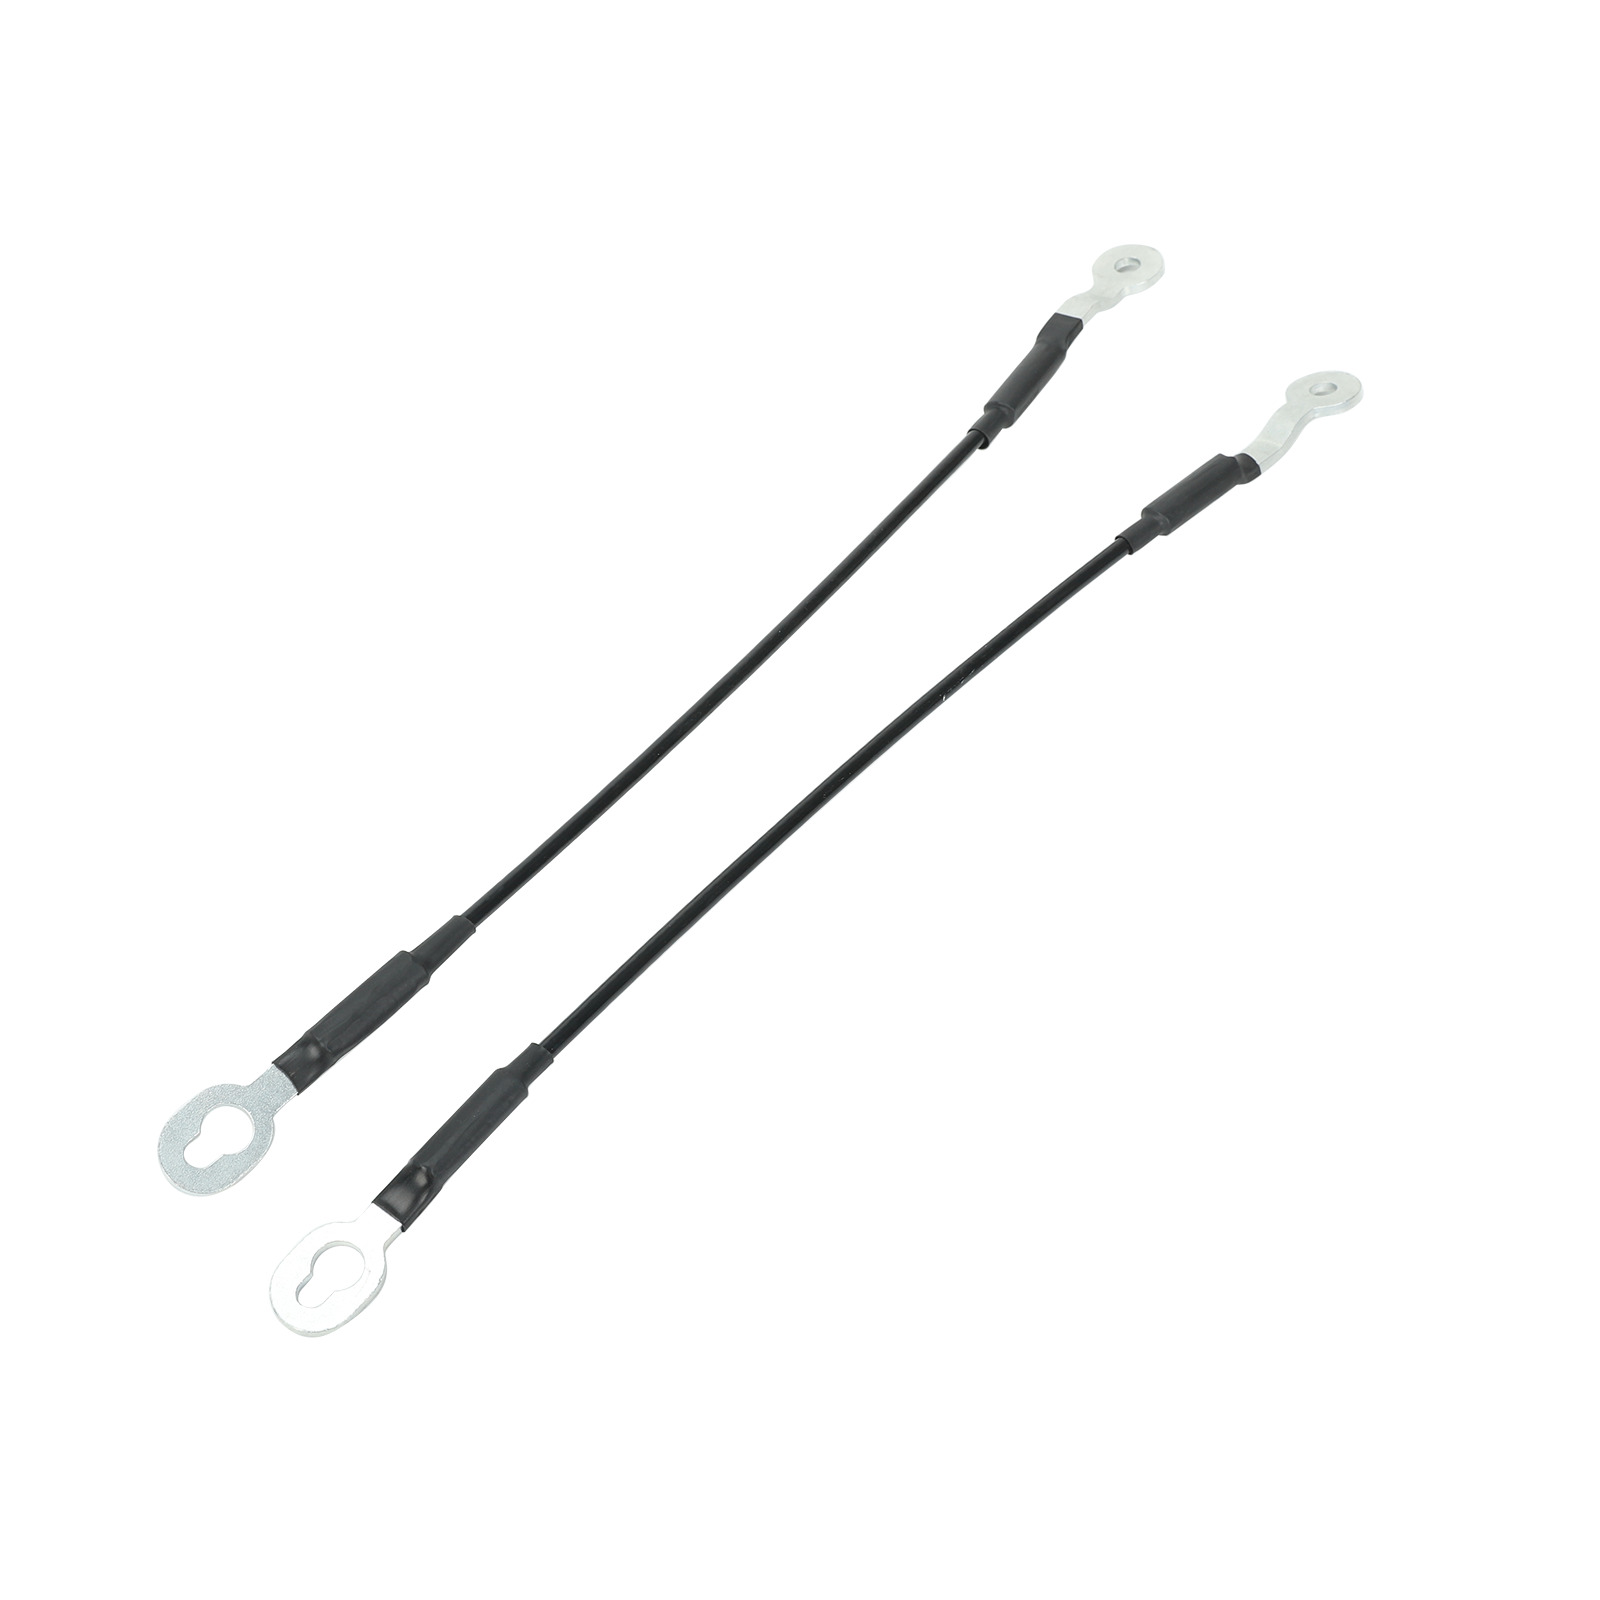 2pc Left + Right Tailgate Cable Kit For 1994-2004 Chevy S10 Pickup GMC Sonoma